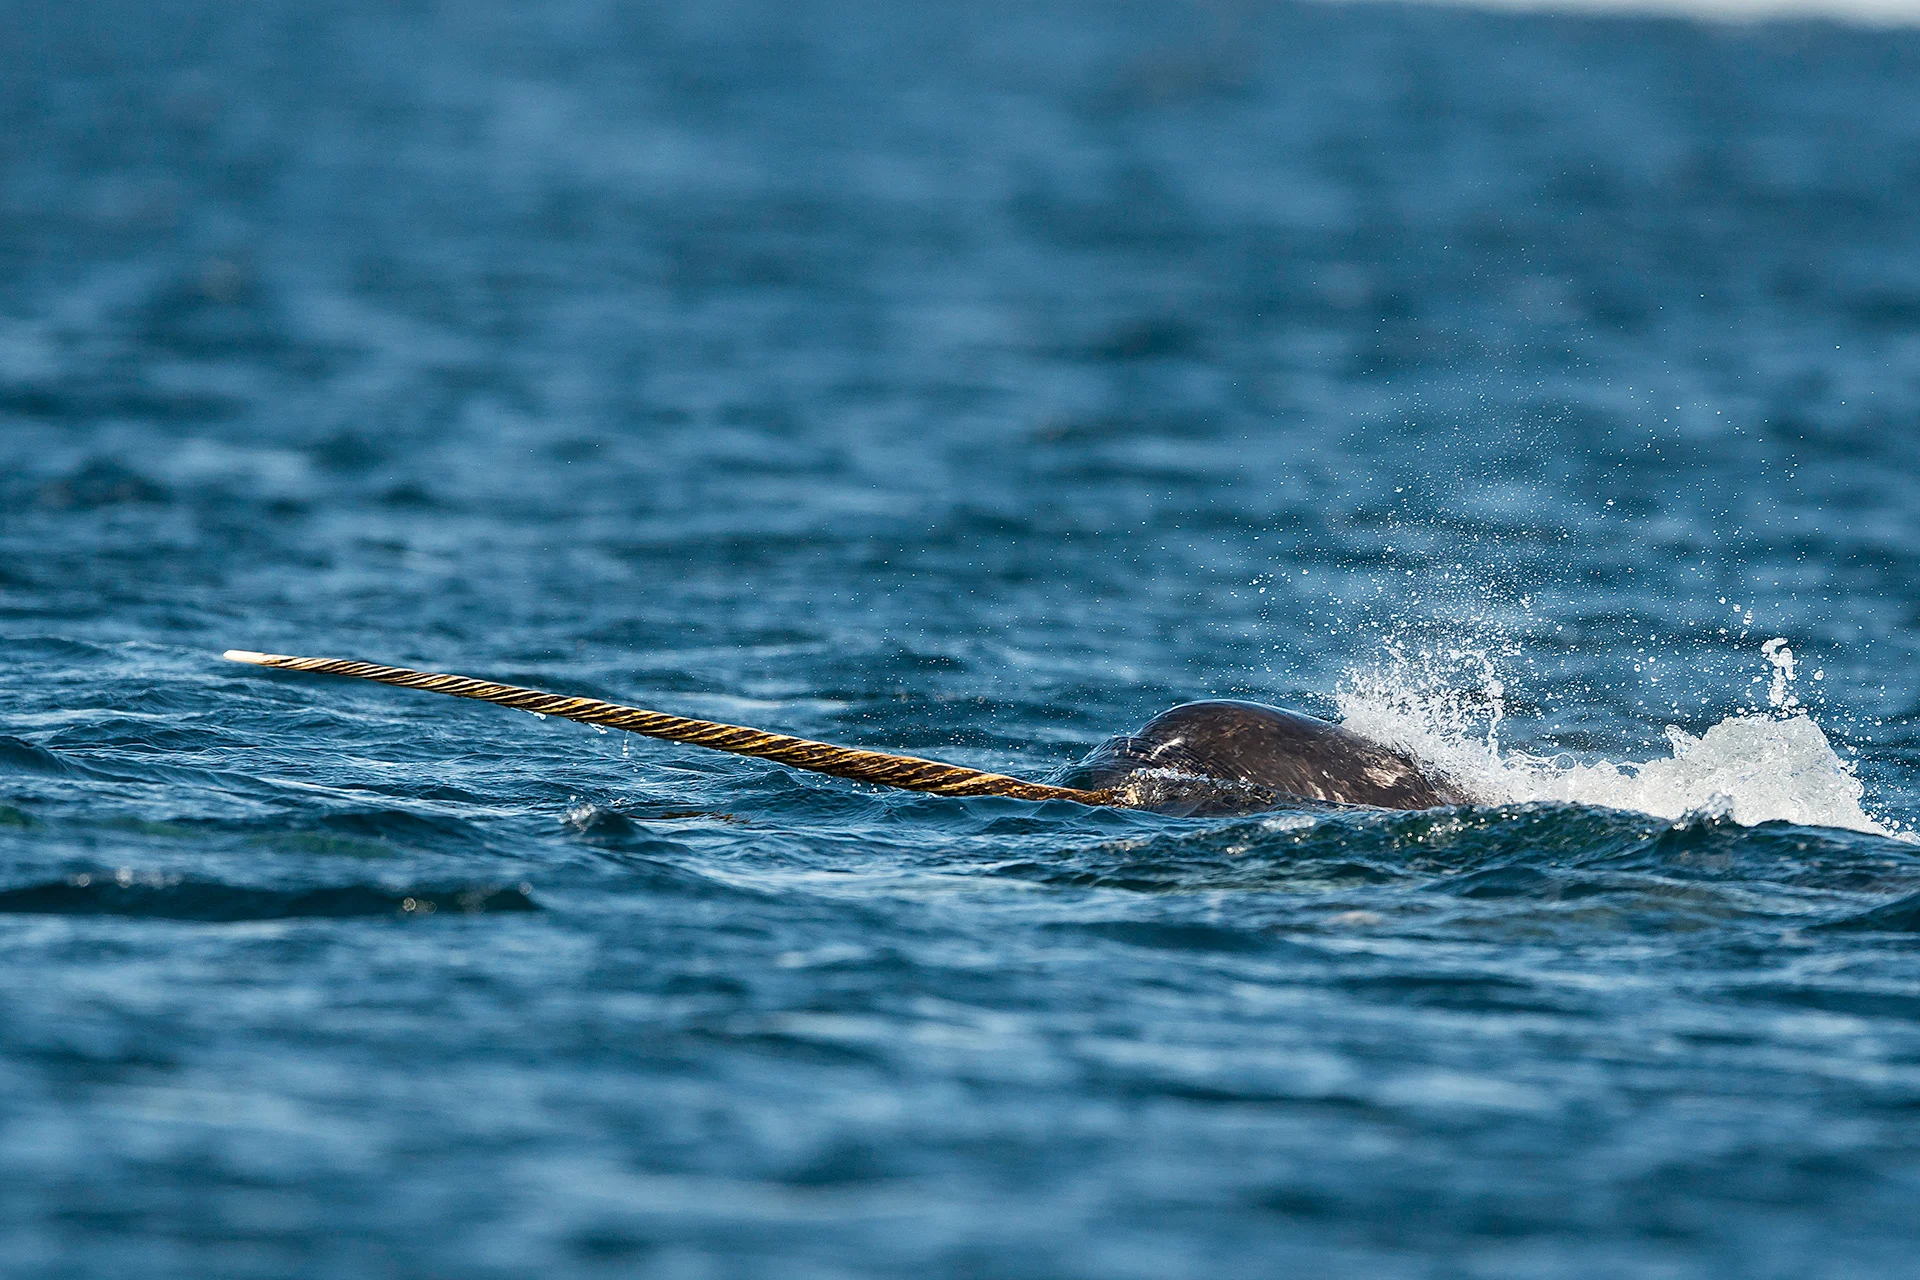 narwhal credit: wildestanimal. Moment. Getty Images.